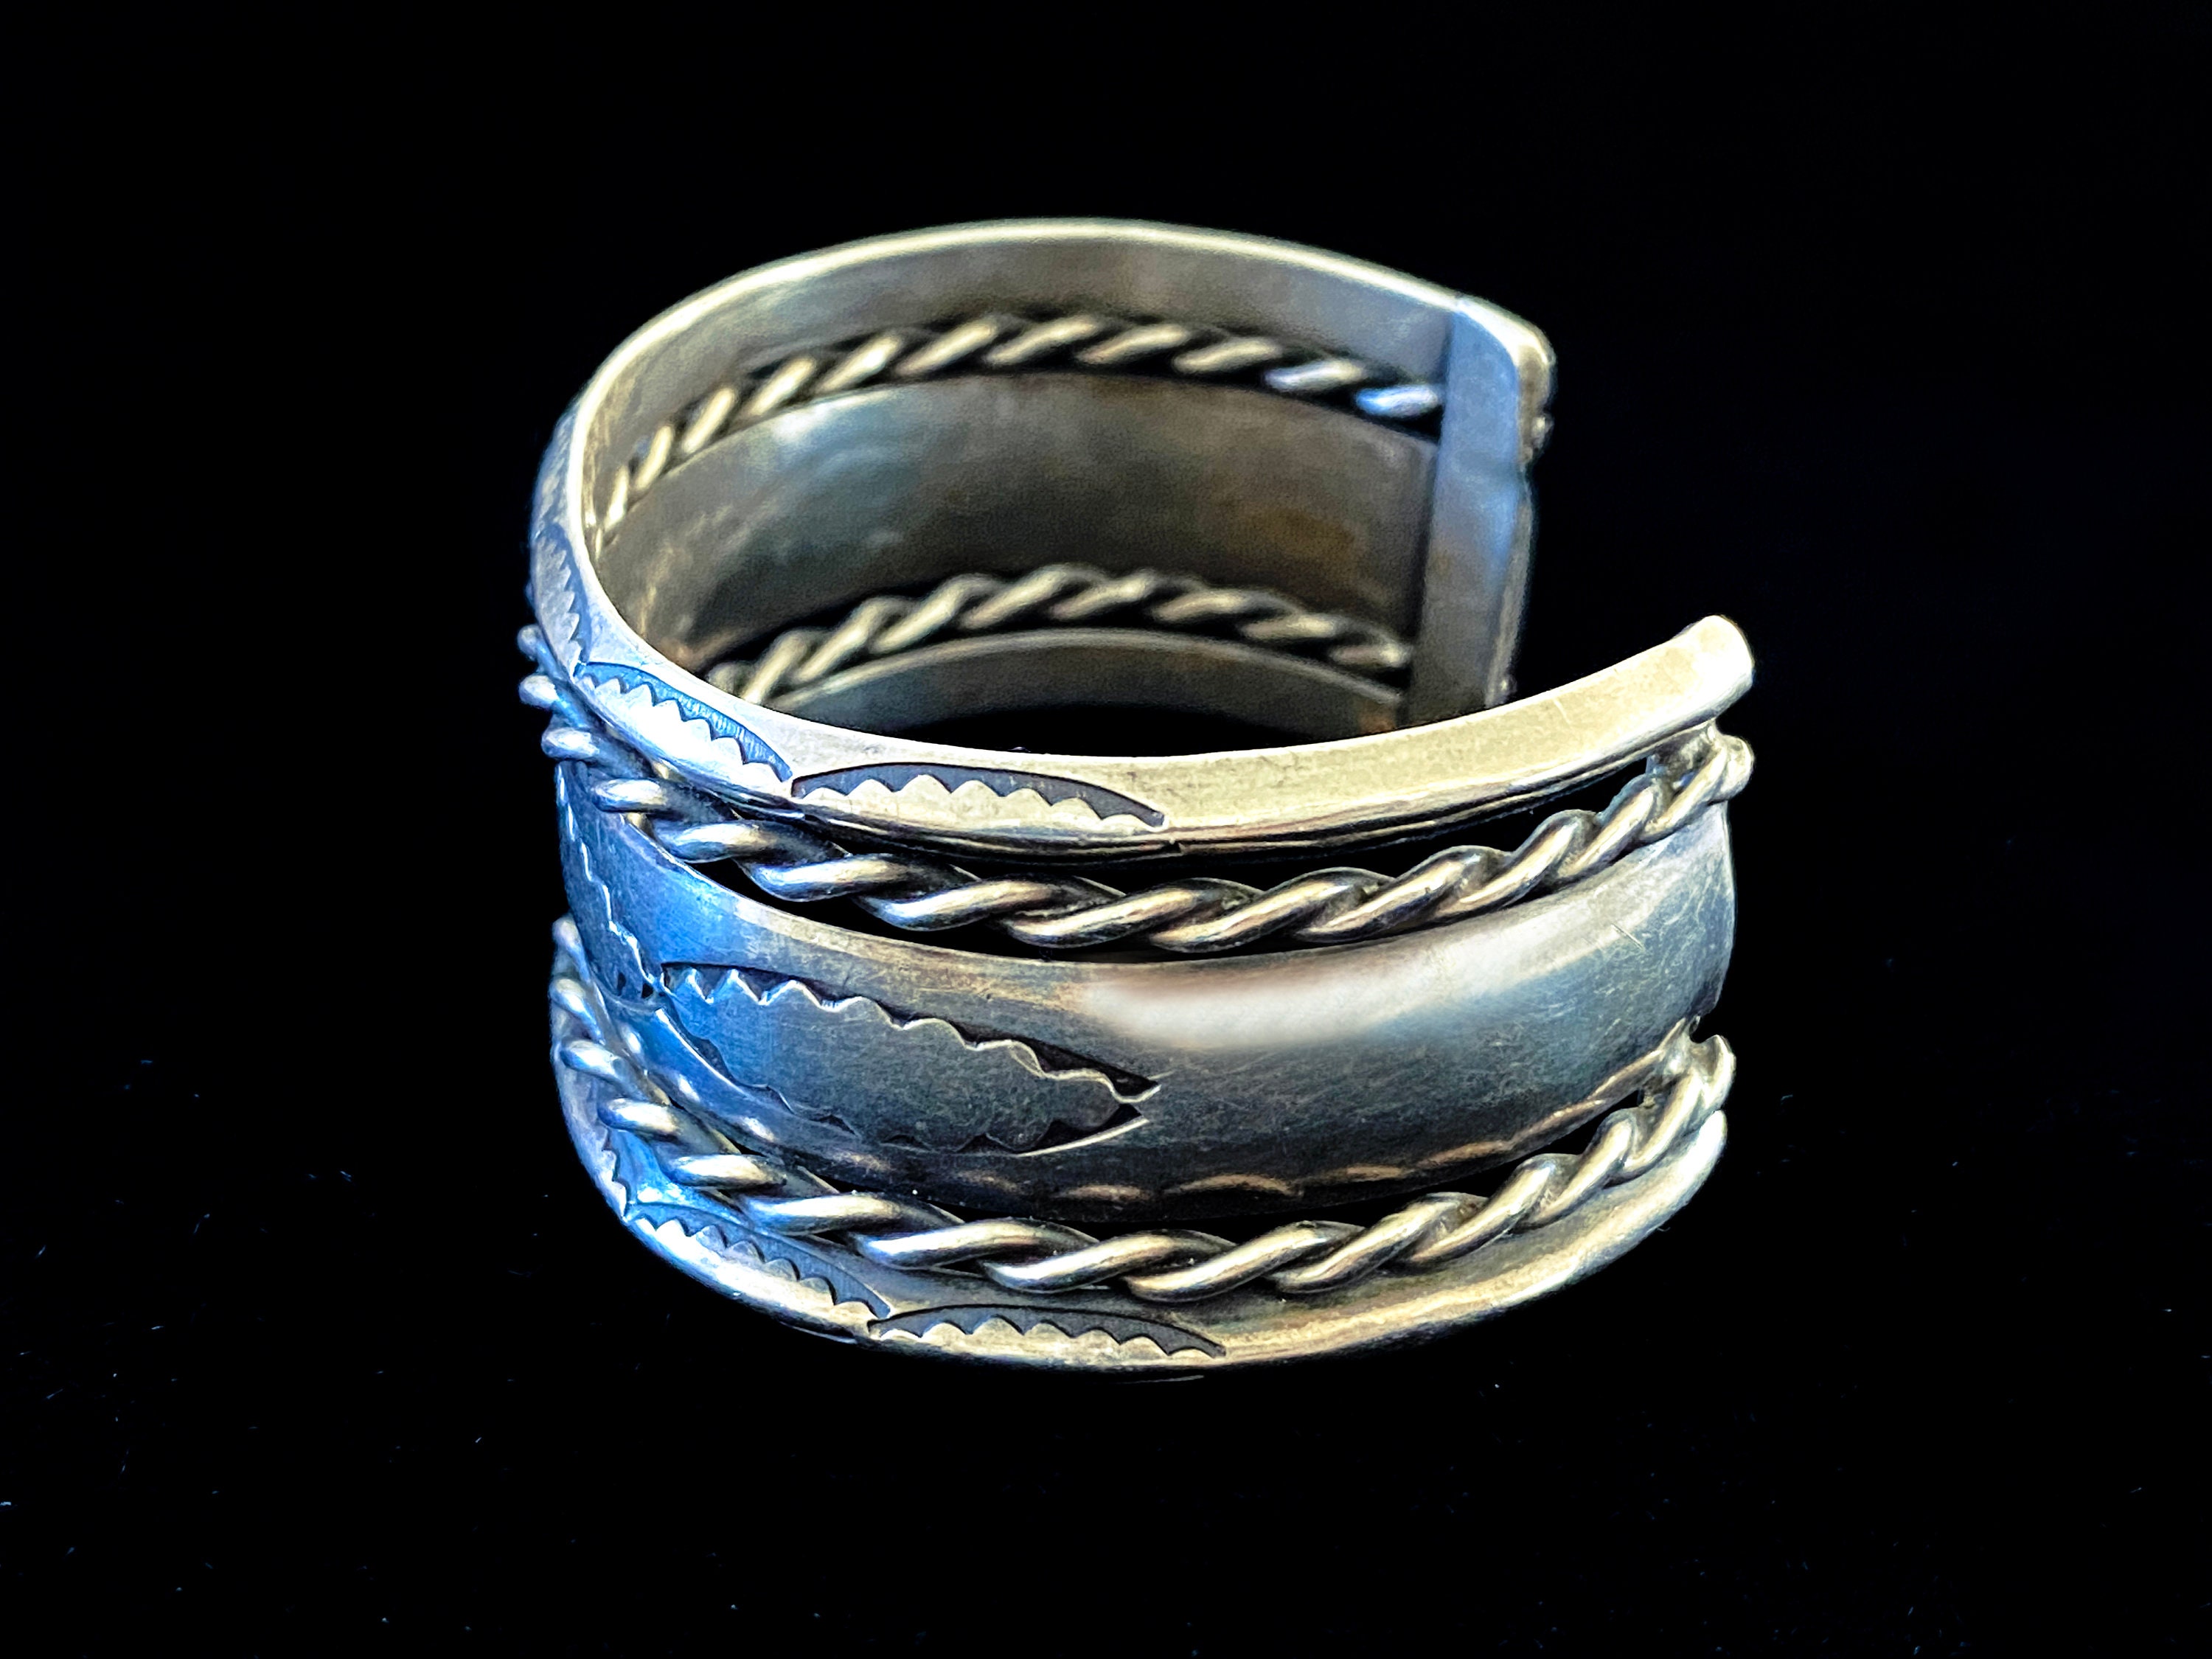 1920s Navajo Bracelet With Twisted Wire and Carinated Borders